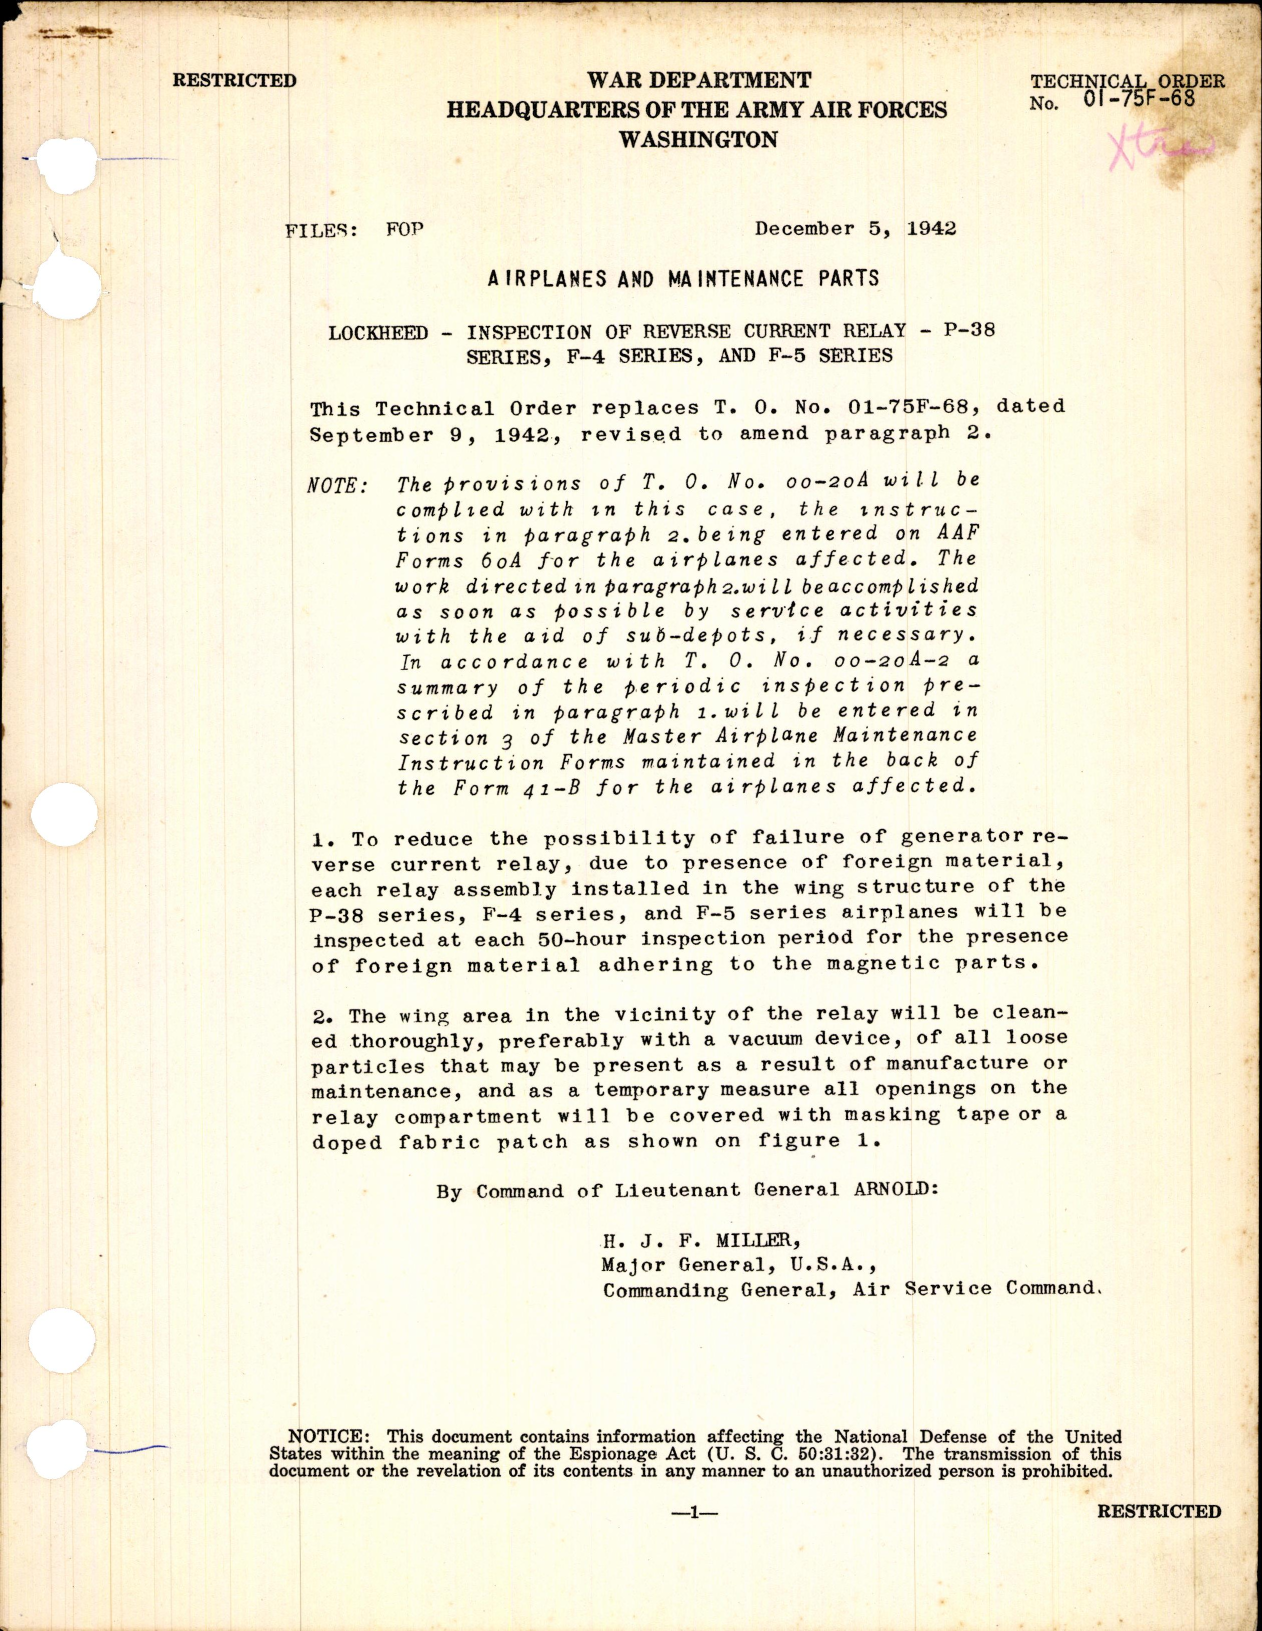 Sample page 1 from AirCorps Library document: Inspection of Reverse Current Relay for P-38 Series, F-4, and F-5 Series